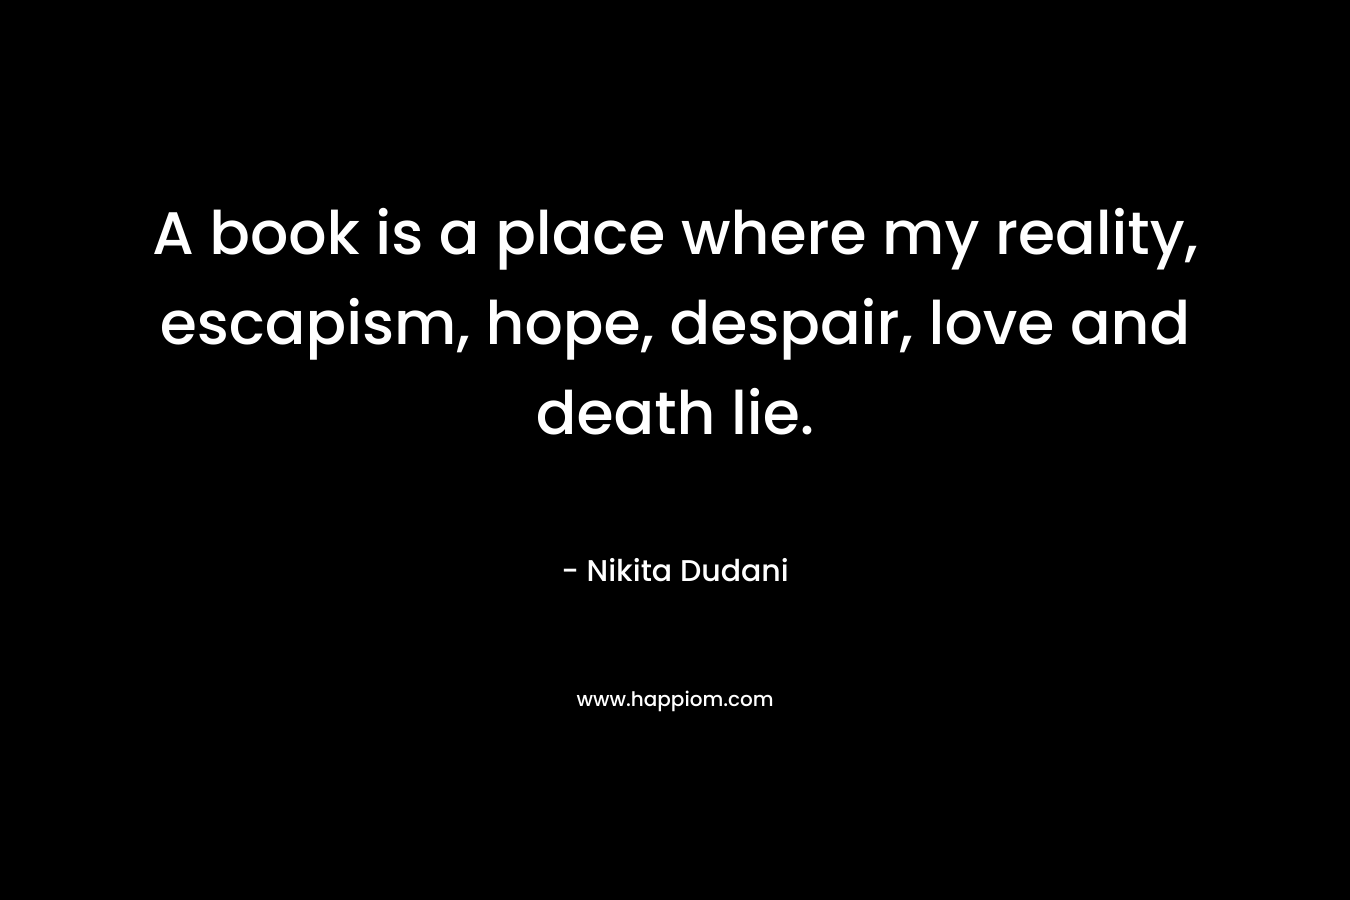 A book is a place where my reality, escapism, hope, despair, love and death lie. – Nikita Dudani